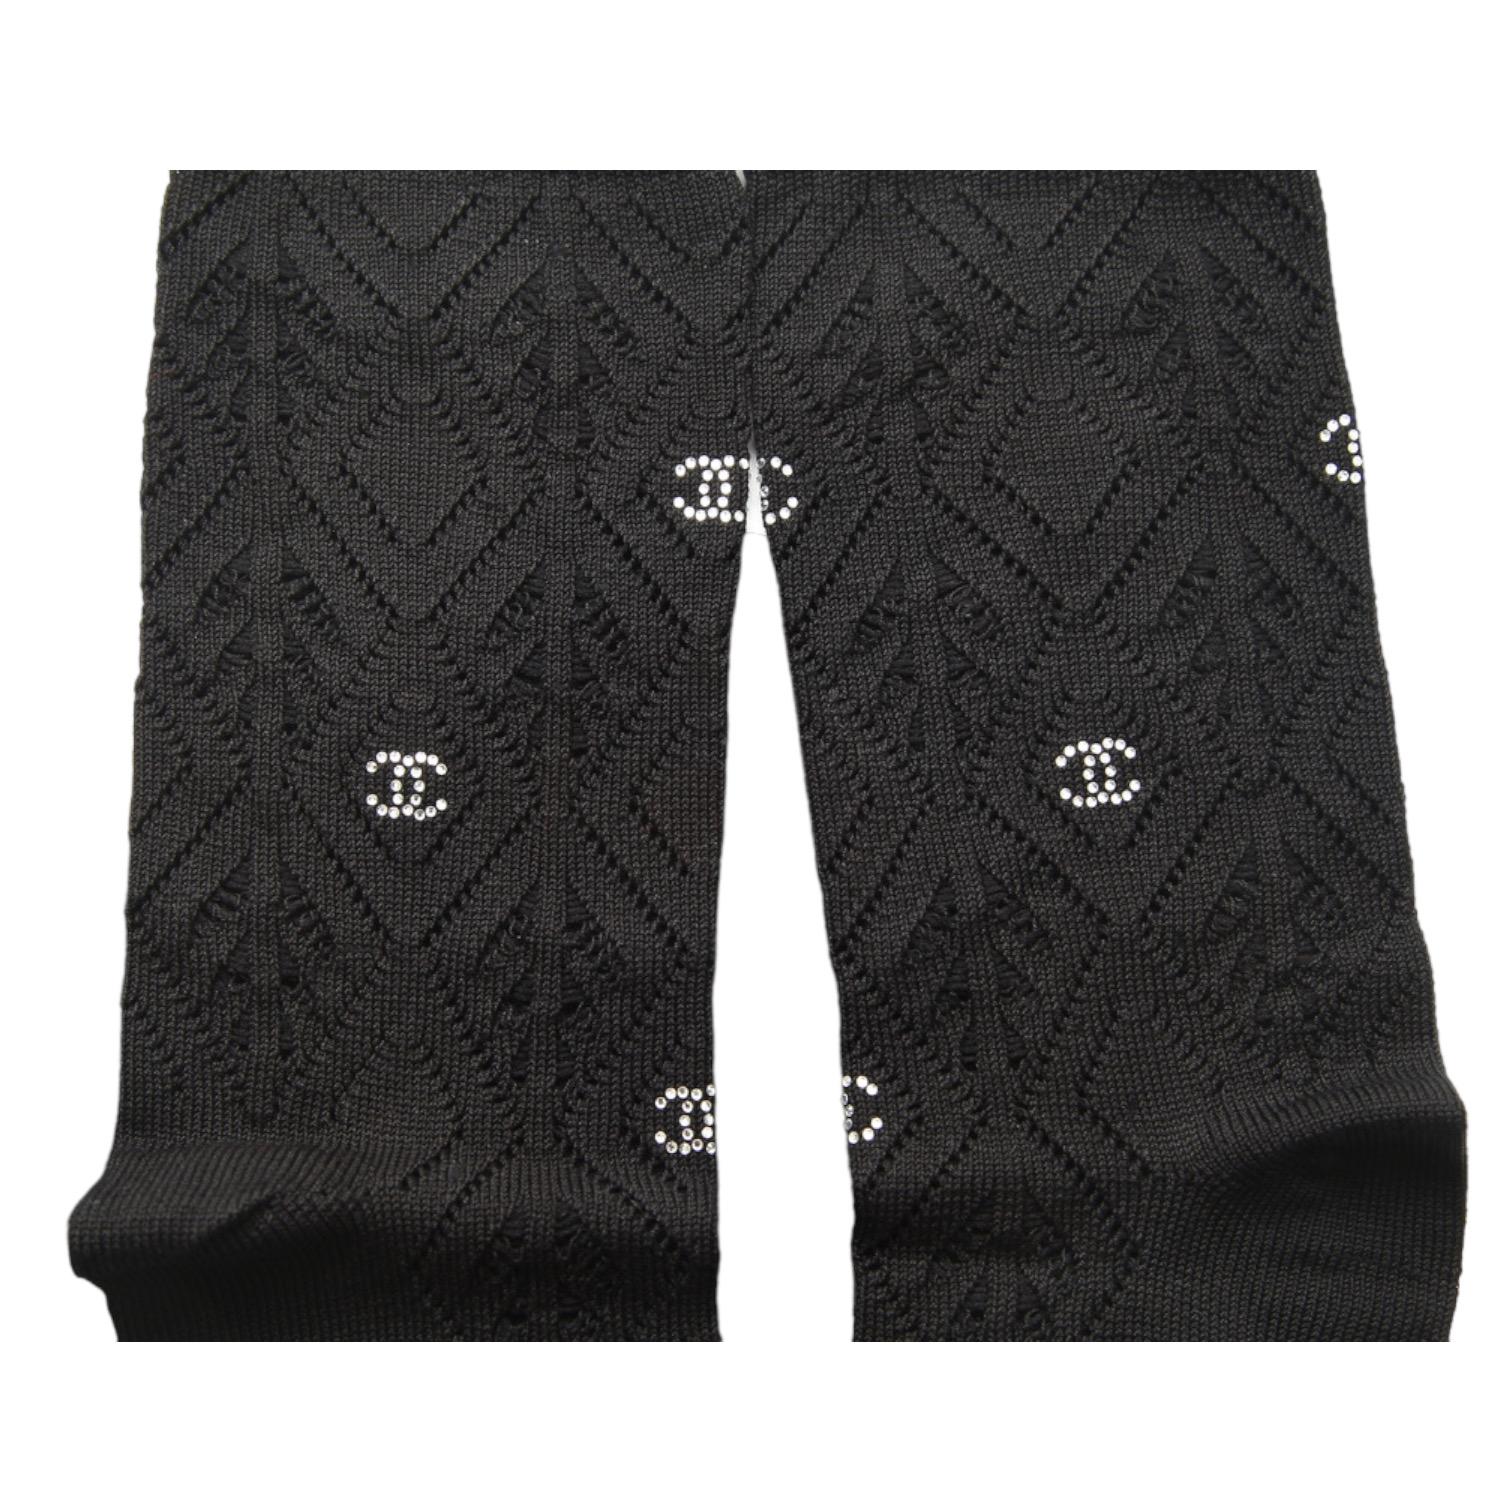 GUARANTEED AUTHENTIC CHANEL 23A BLACK SOCKS CC CRYSTALS


Details:
- Black socks with CC crystals.

Size: M

To Our Customers:
We consider it a privilege to serve as your luxury fashion concierge
Whether you are looking to buy that special